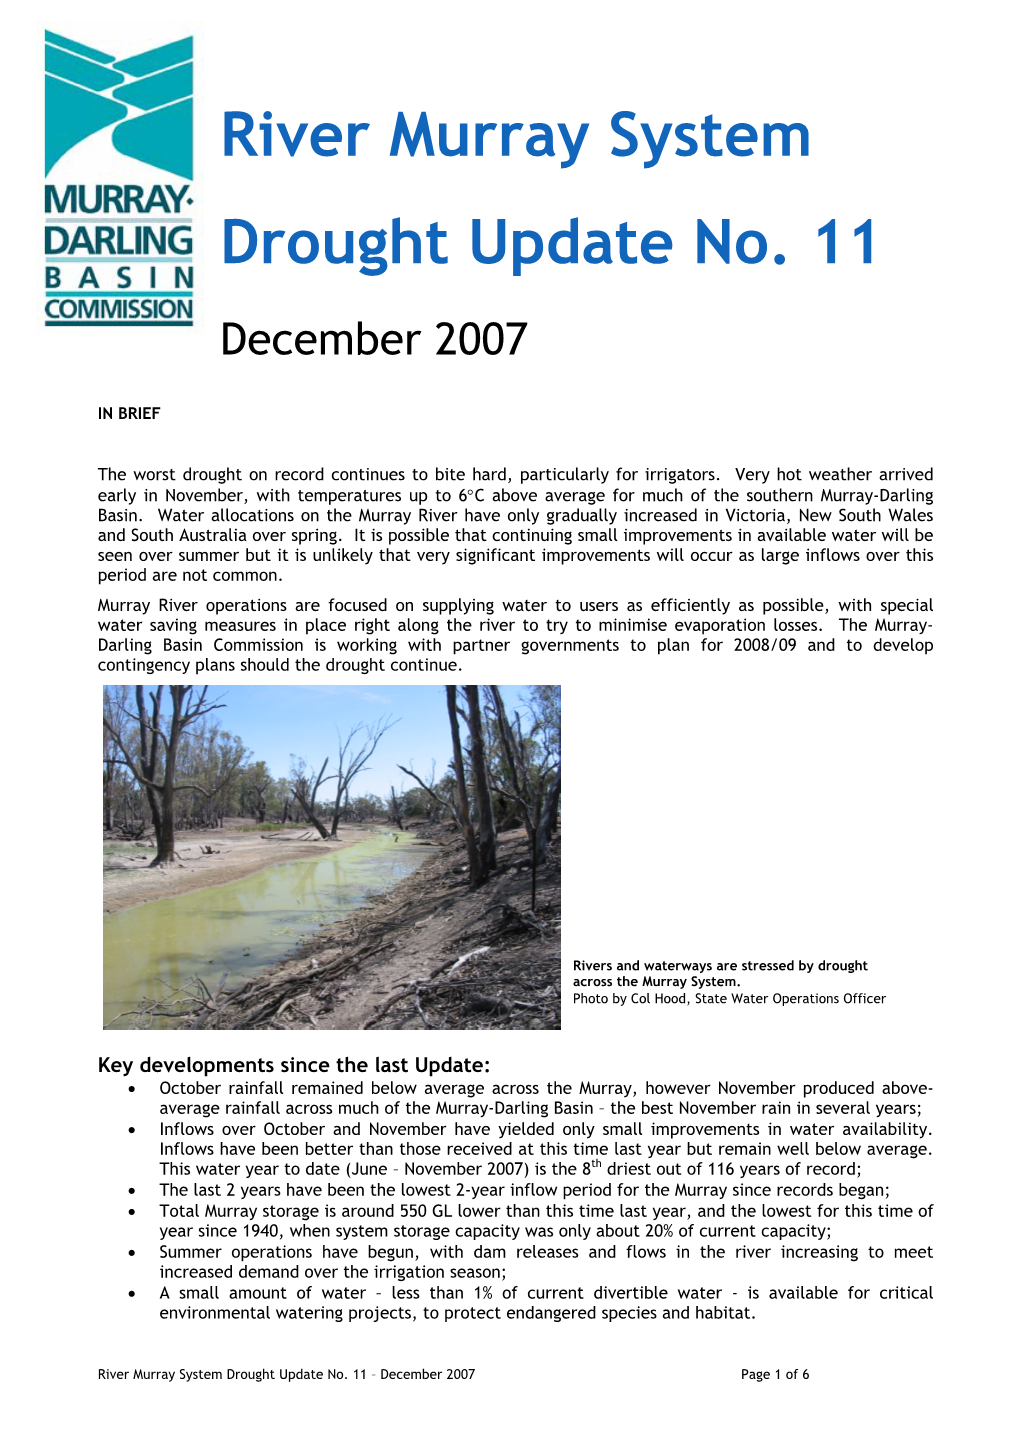 River Murray System Drought Update No. 11 – December 2007